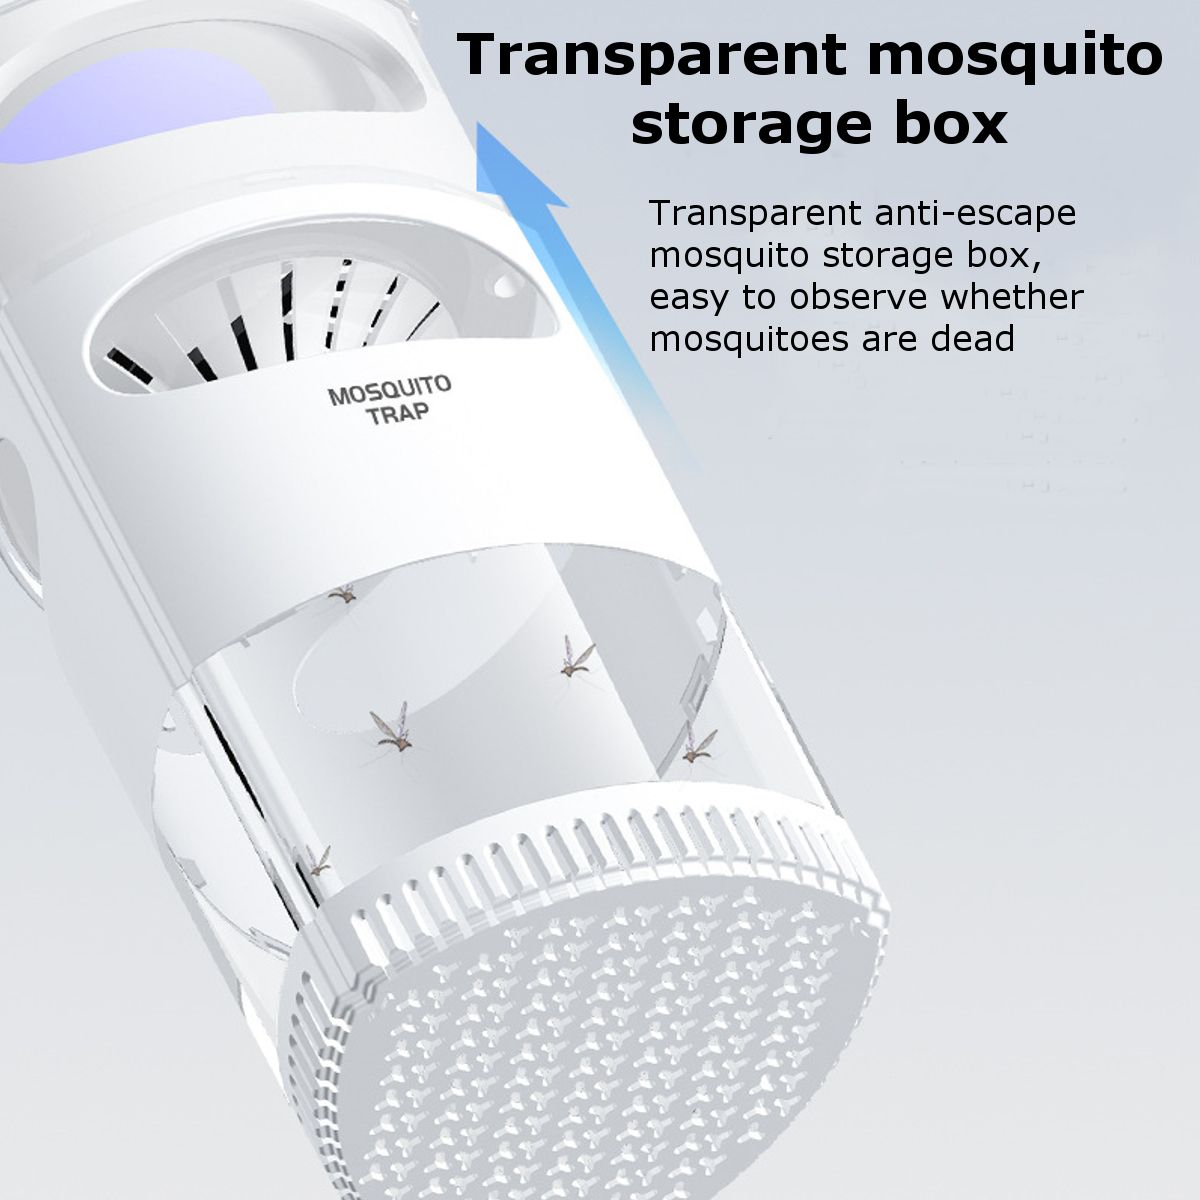 Mosquito-Killer-Lamp-USB-Electric-Photocatalytic-Bug-Repellent-Insect-Trap-Light-1679763